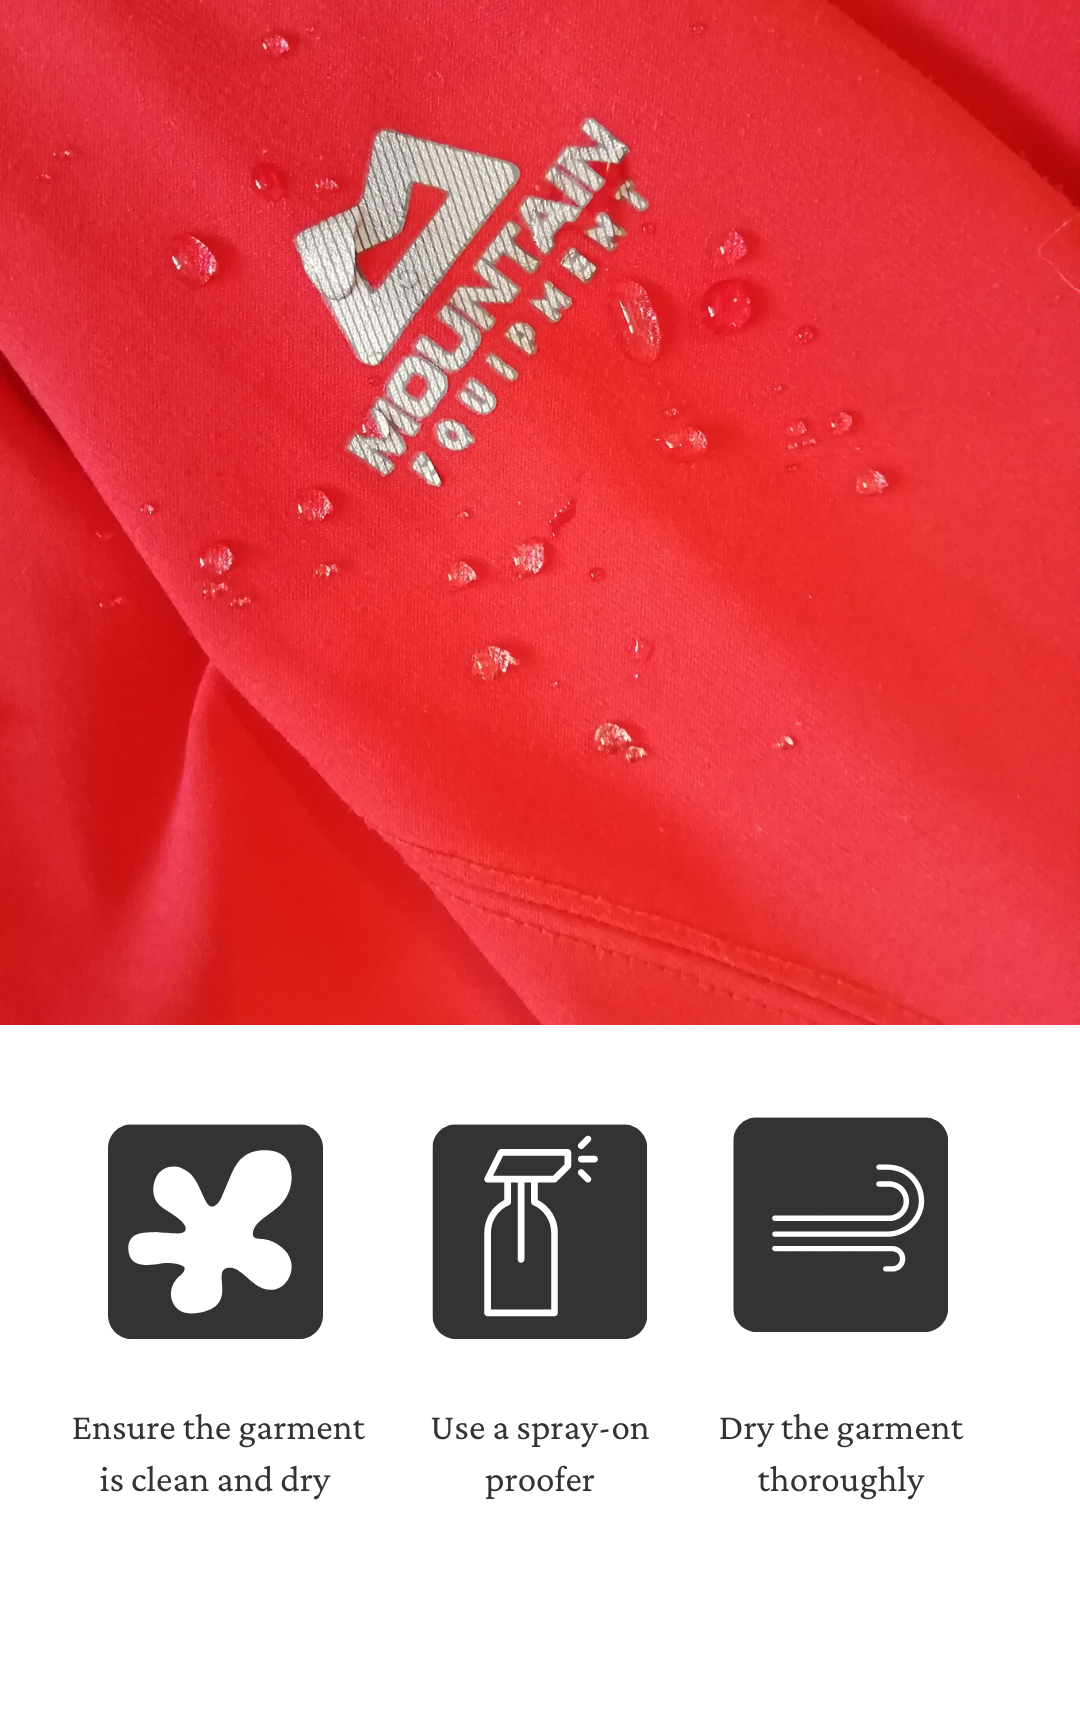 Softshell Clothing Cleaner & Waterproofing - Tech Wash® & Softshell Pr